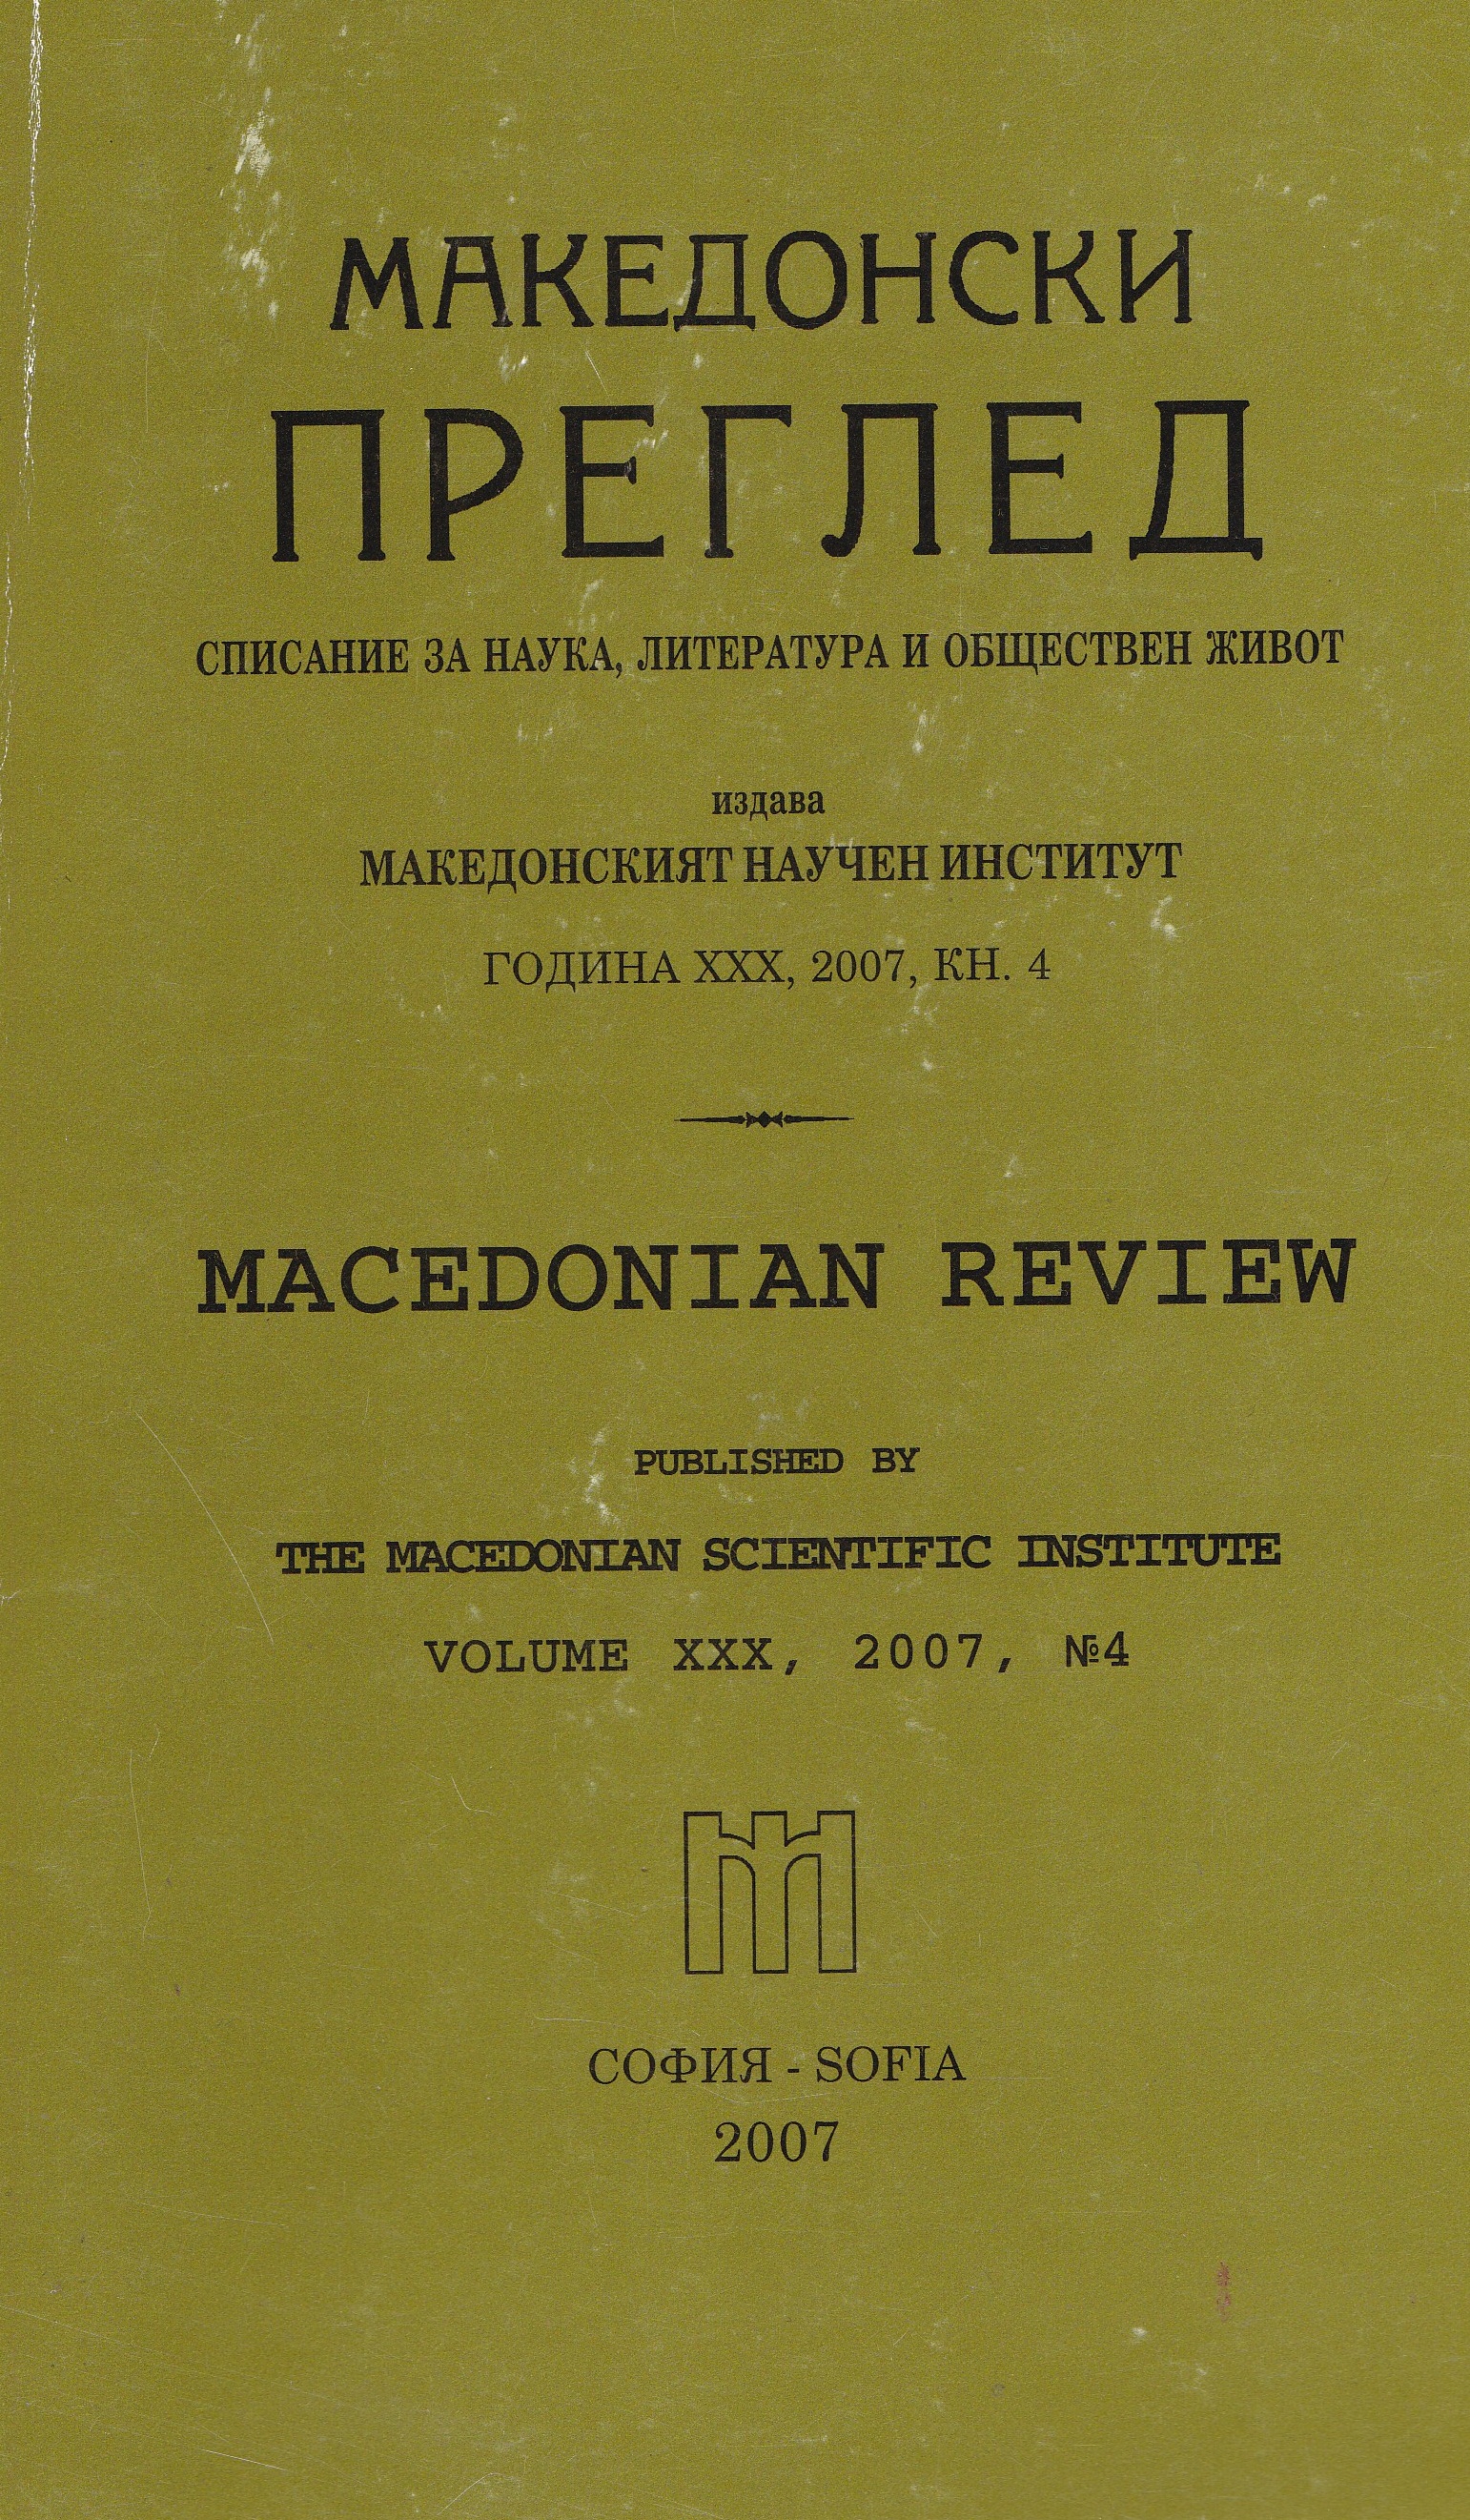 Publications of the Macedonian Scientific Institute Cover Image